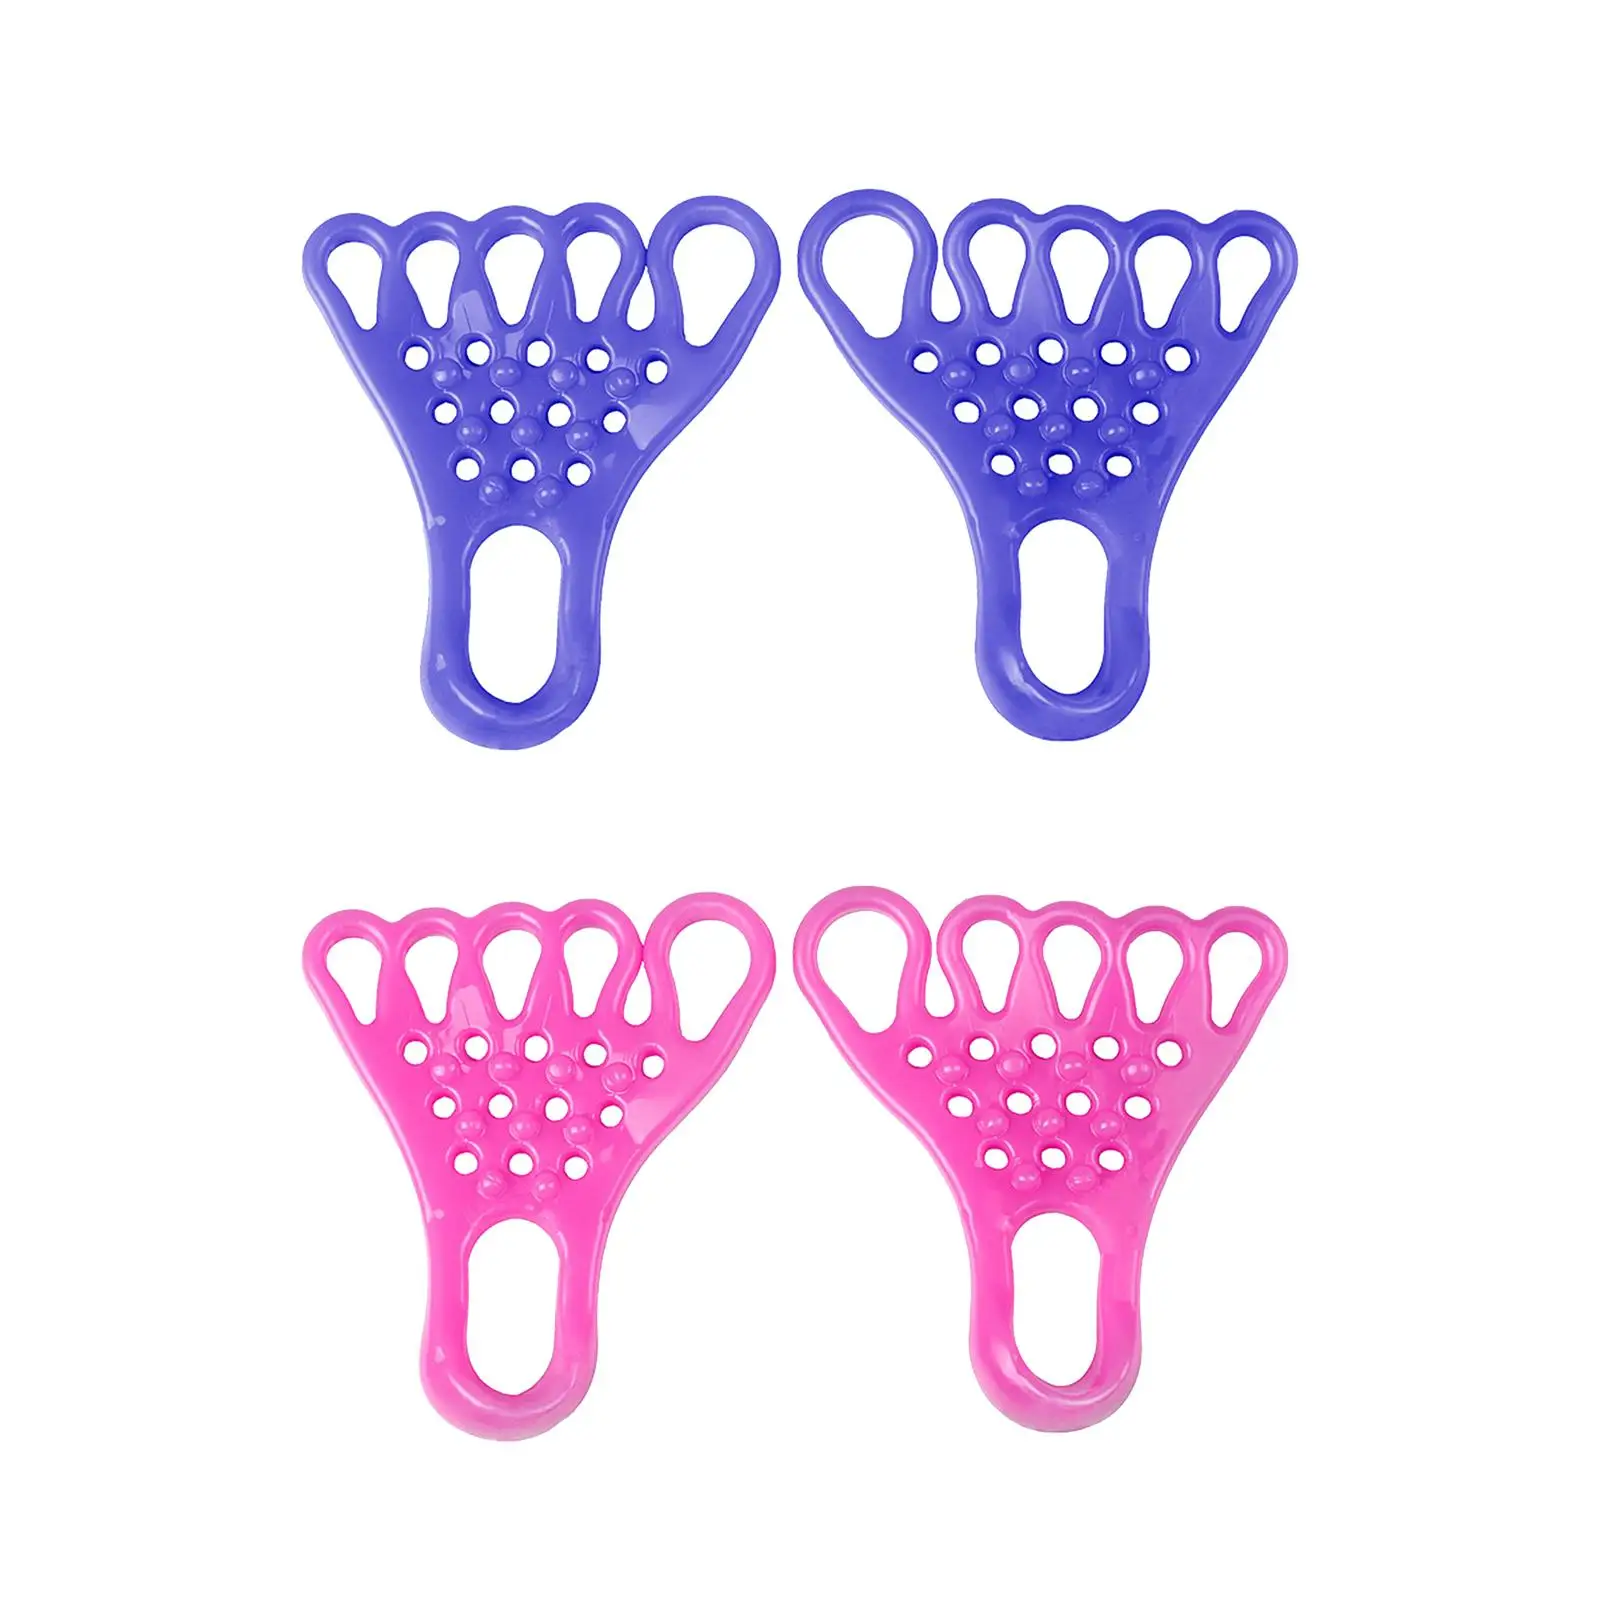 Toe Straightener Toe Stretcher Foot Care Hammer Toe Straighteners for Hallux Valgus Overlapping Toes Big Toe Yoga Bunions